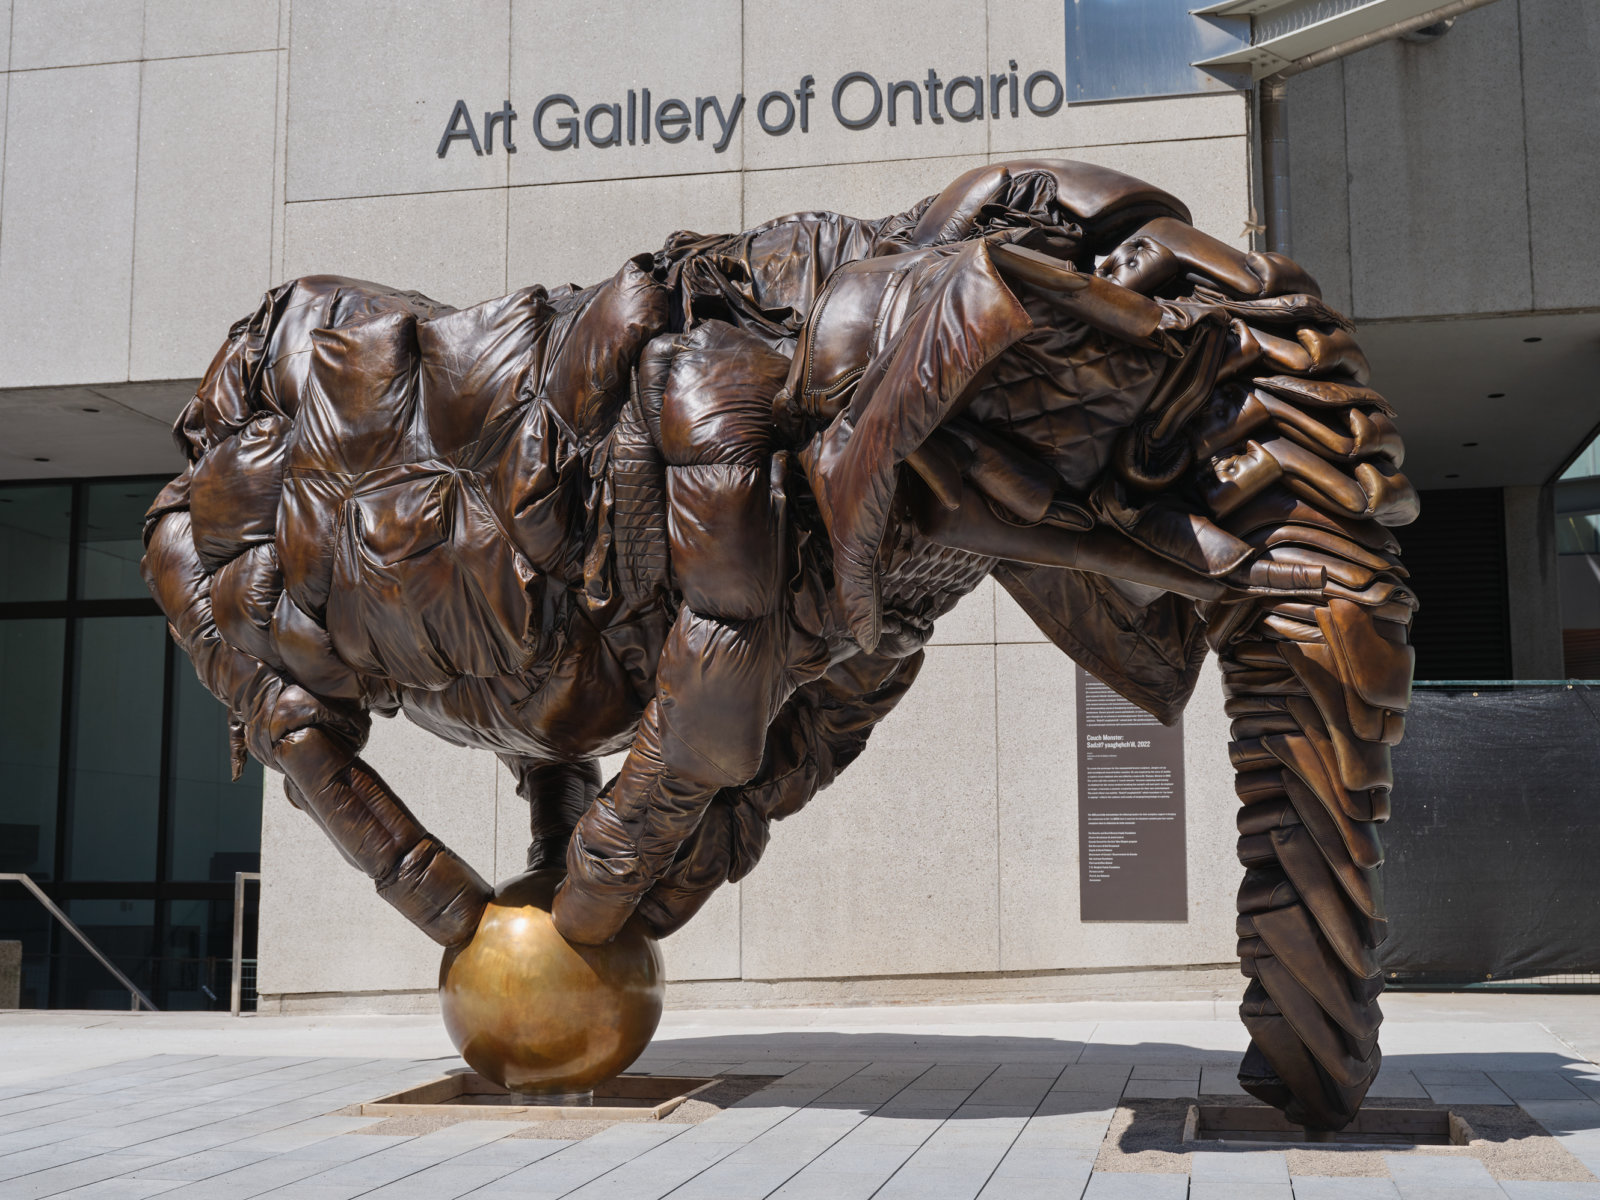 Brian Jungen, Couch Monster: Sadzěʔ yaaghęhch’ill, 2022, bronze, 149 x 131 x 219 1/2 in. (378.5 x 332.7 x 557.5 cm), collection of the Art Gallery of Ontario. Commission, with funds from Government of Canada/Gouvernement du Canada, Canada Council for the Arts’ New Chapter program, The Renette and David Berman Family Foundation, Charles Brindamour &amp; Josée Letarte, Bob Dorrance &amp; Gail Drummond, Angela &amp; David Feldman, Hal Jackman Foundation, Phil Lind &amp; Ellen Roland, T. R. Meighen Family Foundation, Partners in Art, Paul &amp; Jan Sabourin, an anonymous donor, and with funds by exchange from Morey and Jennifer Chaplick, 2022